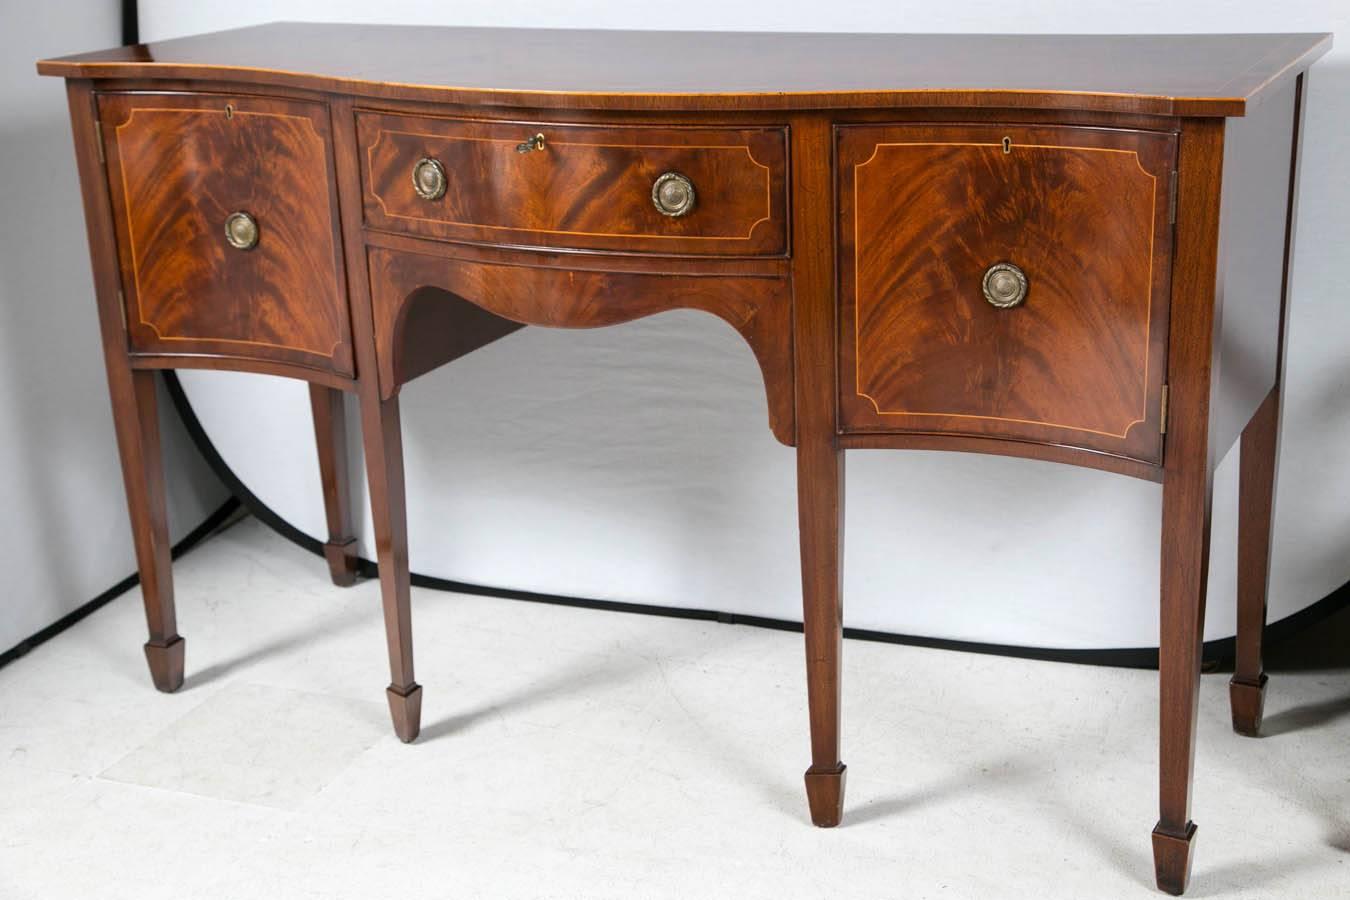 Lovely English mahogany sideboard in the Georgian style circa 1900.
Great color.